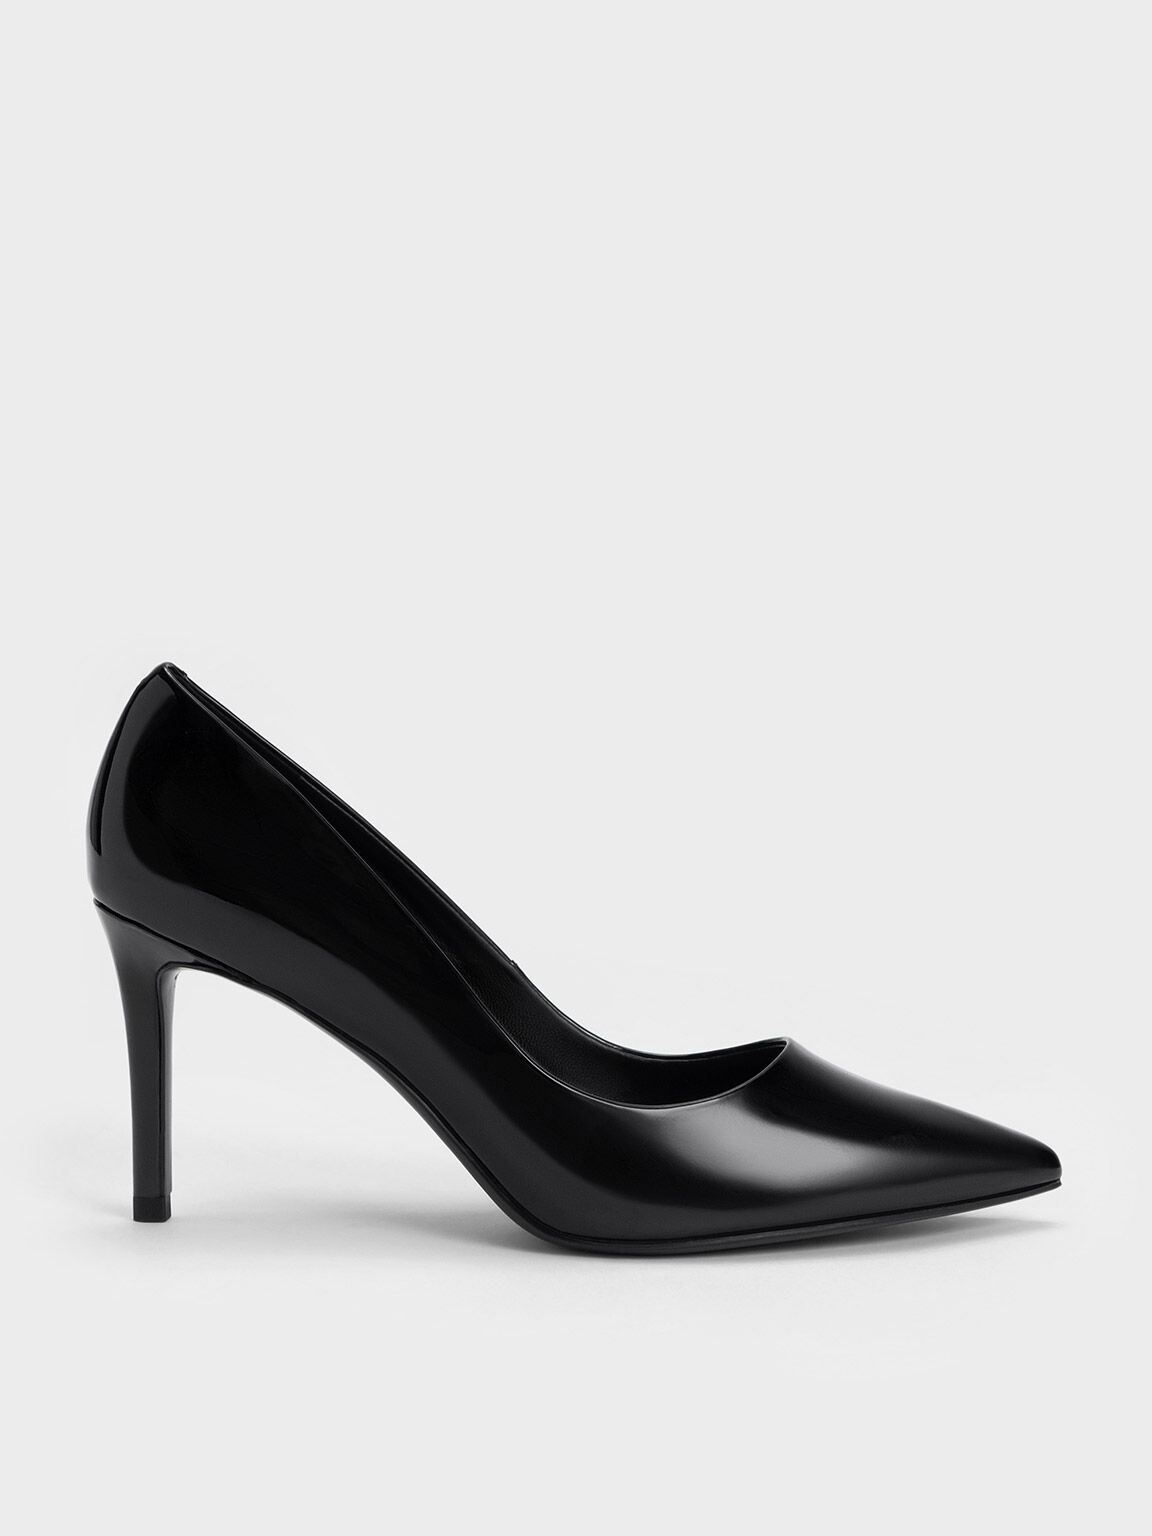 Women's Patent Leather Chunky Heel Pumps Closed Toe Shoes -  TheCelebrityDresses